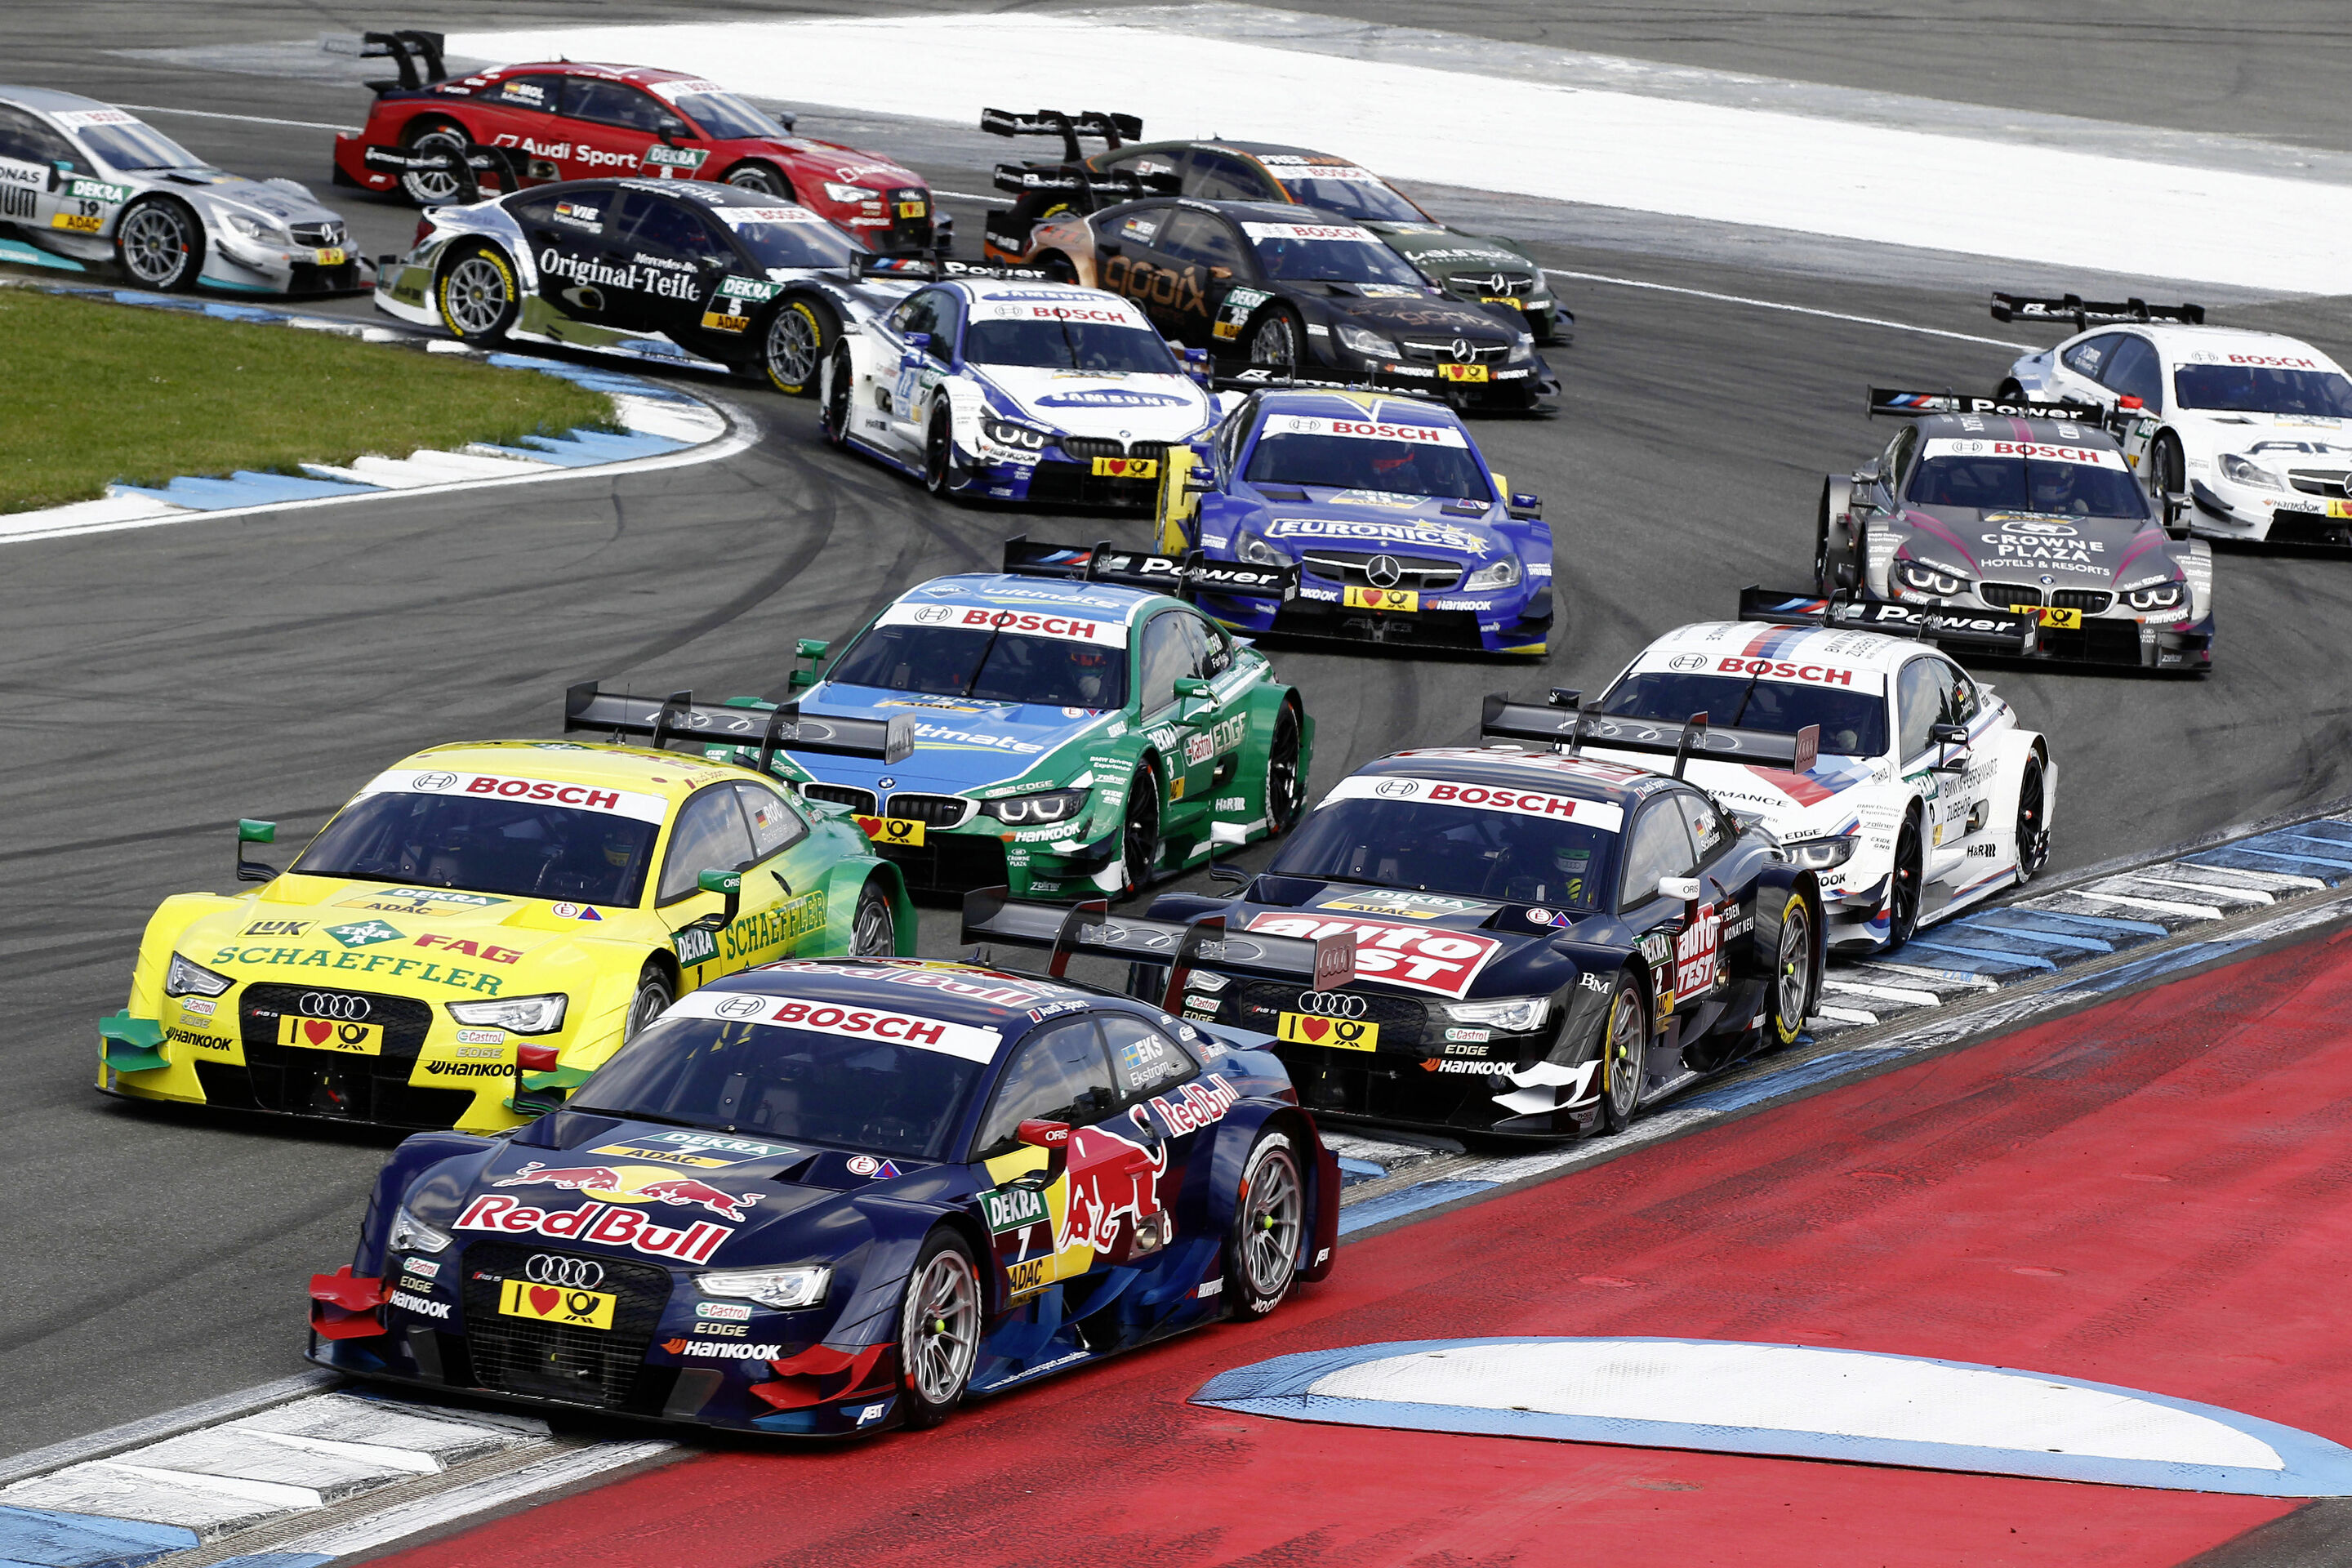 Quotes after the race at Hockenheim